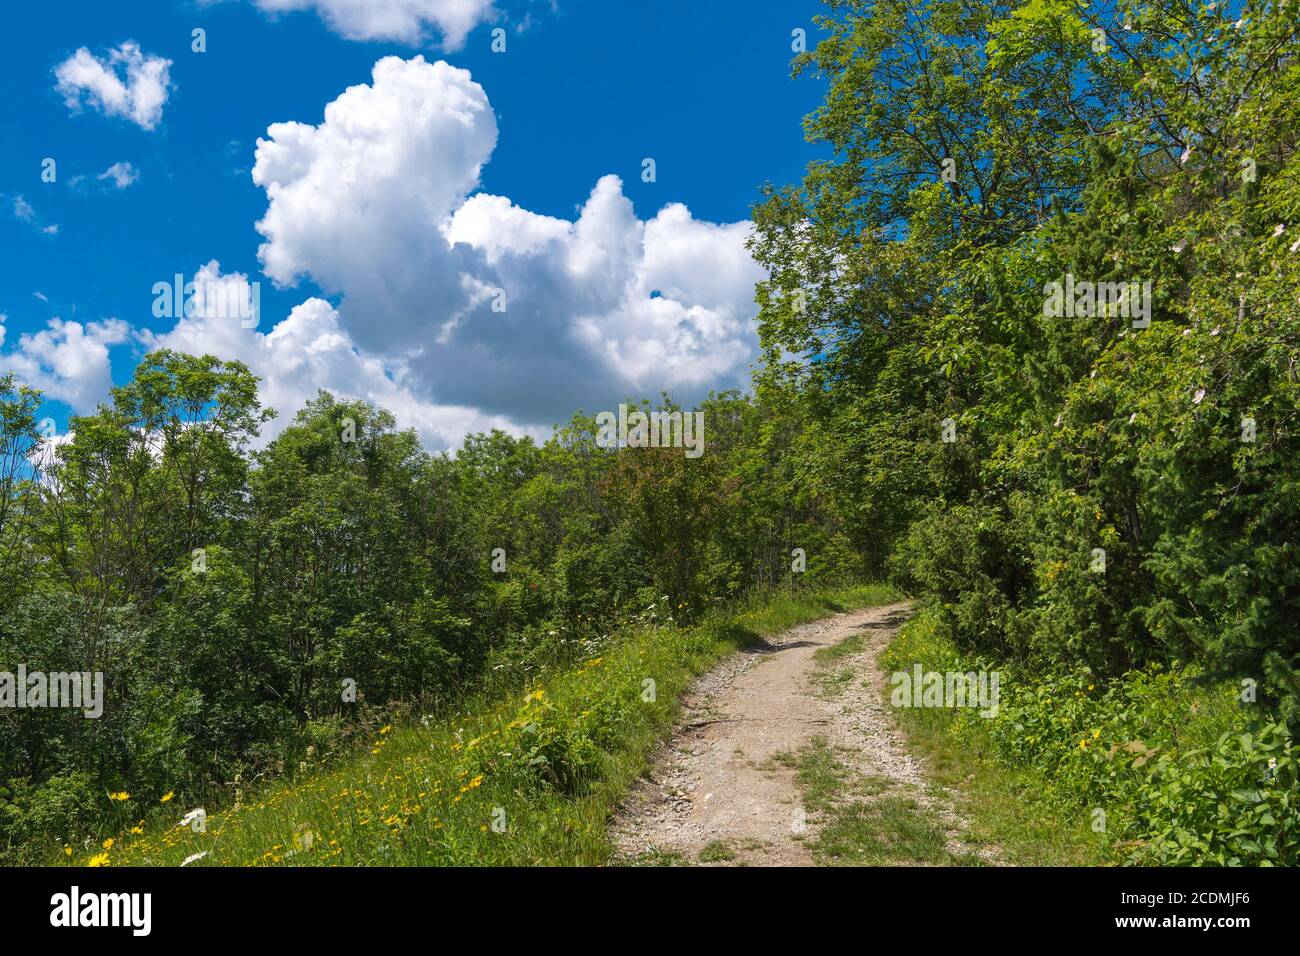 Hiking trail through orchid meadow in the Leutratal nature reserve, Jena, Thuringia, Germany Stock Photo